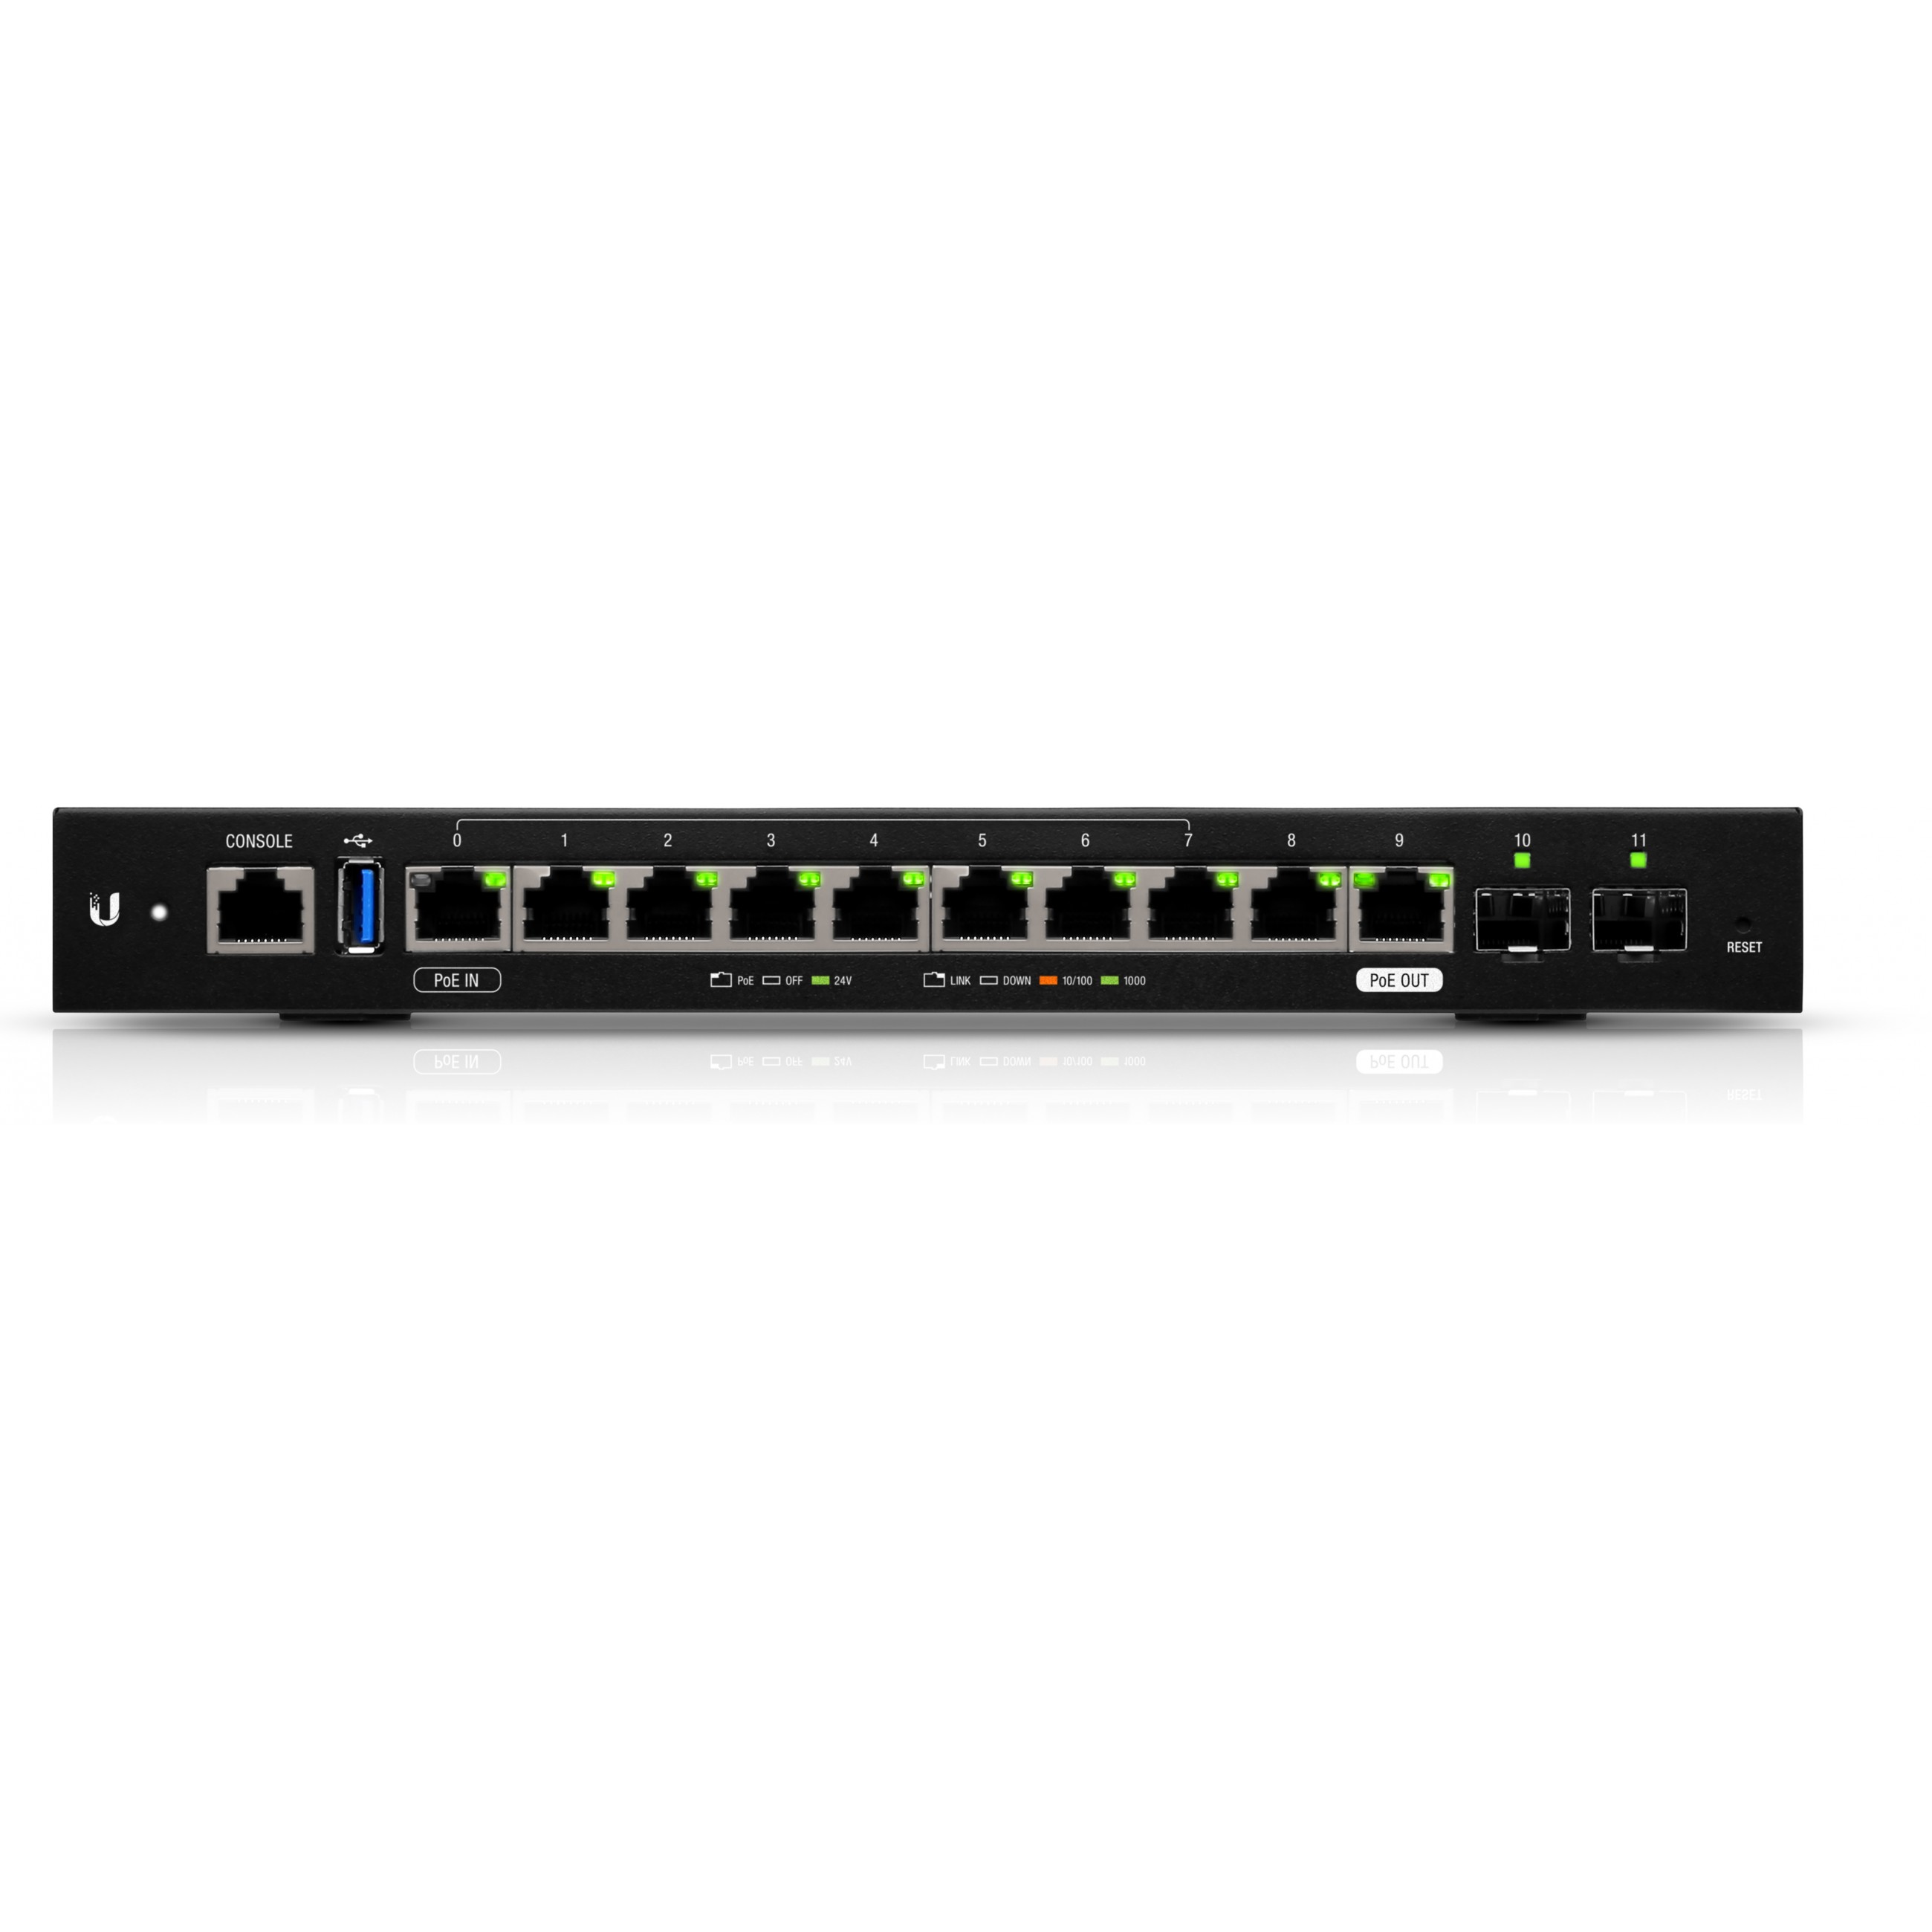 Ubiquiti EdgeRouter ER-12 wired router